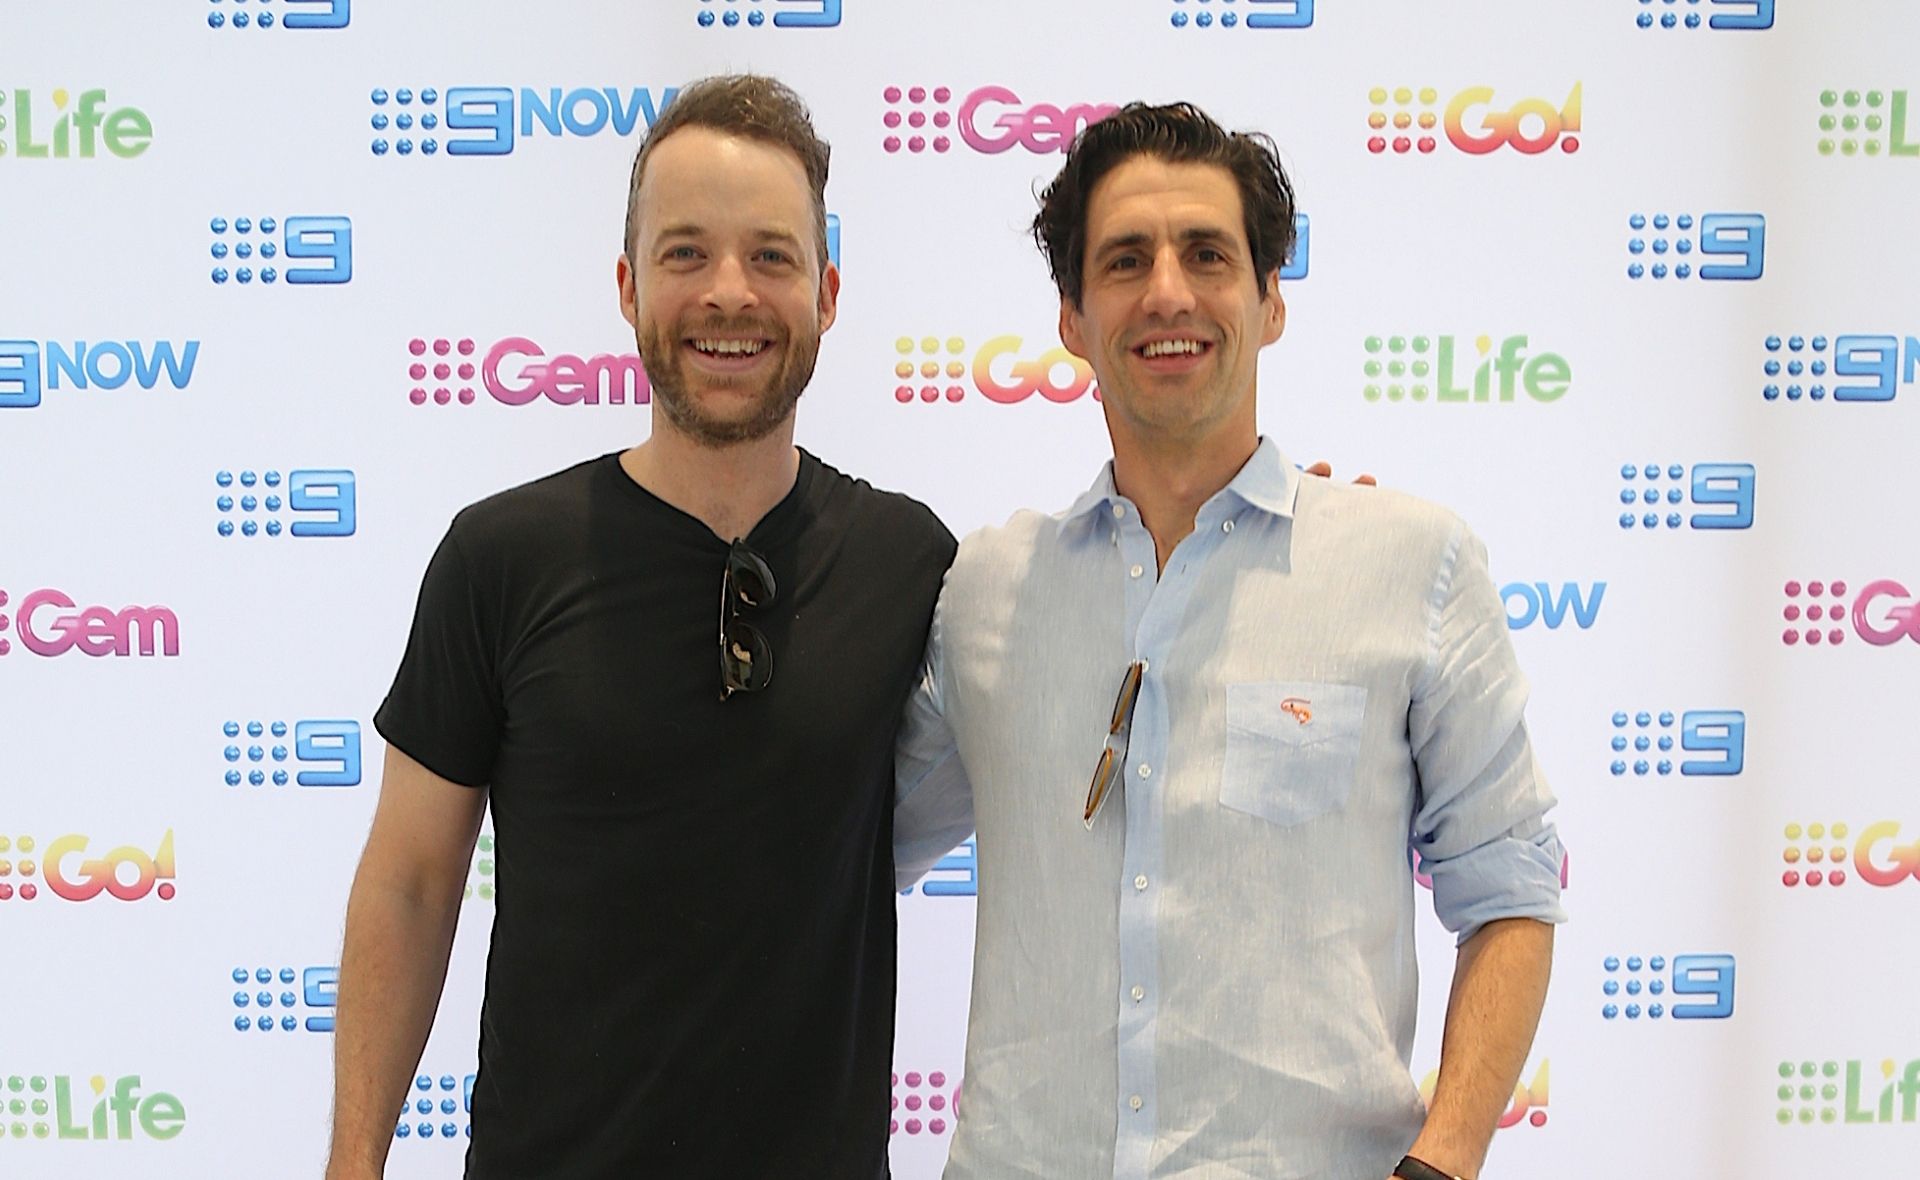 They’ve travelled the world together and won over Australia, but Hamish Blake and Andy Lee’s newest journey is a tale of true friendship